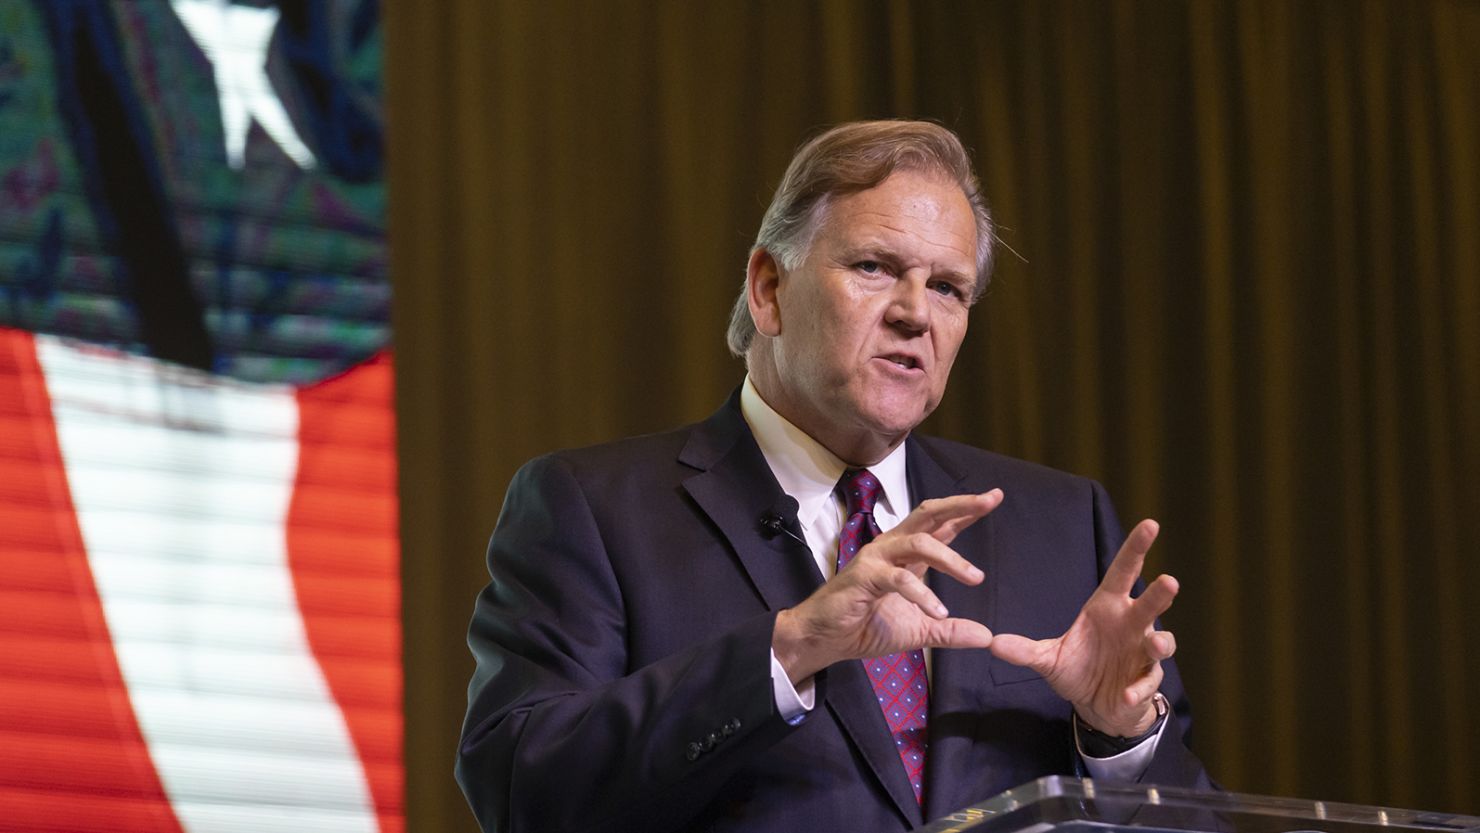 Former Rep. Mike Rogers, a Republican from Michigan, speaks during the Palmetto Family Council's Vision 24 national conservative policy forum in North Charleston, South Carolina, on March 18, 2023. 